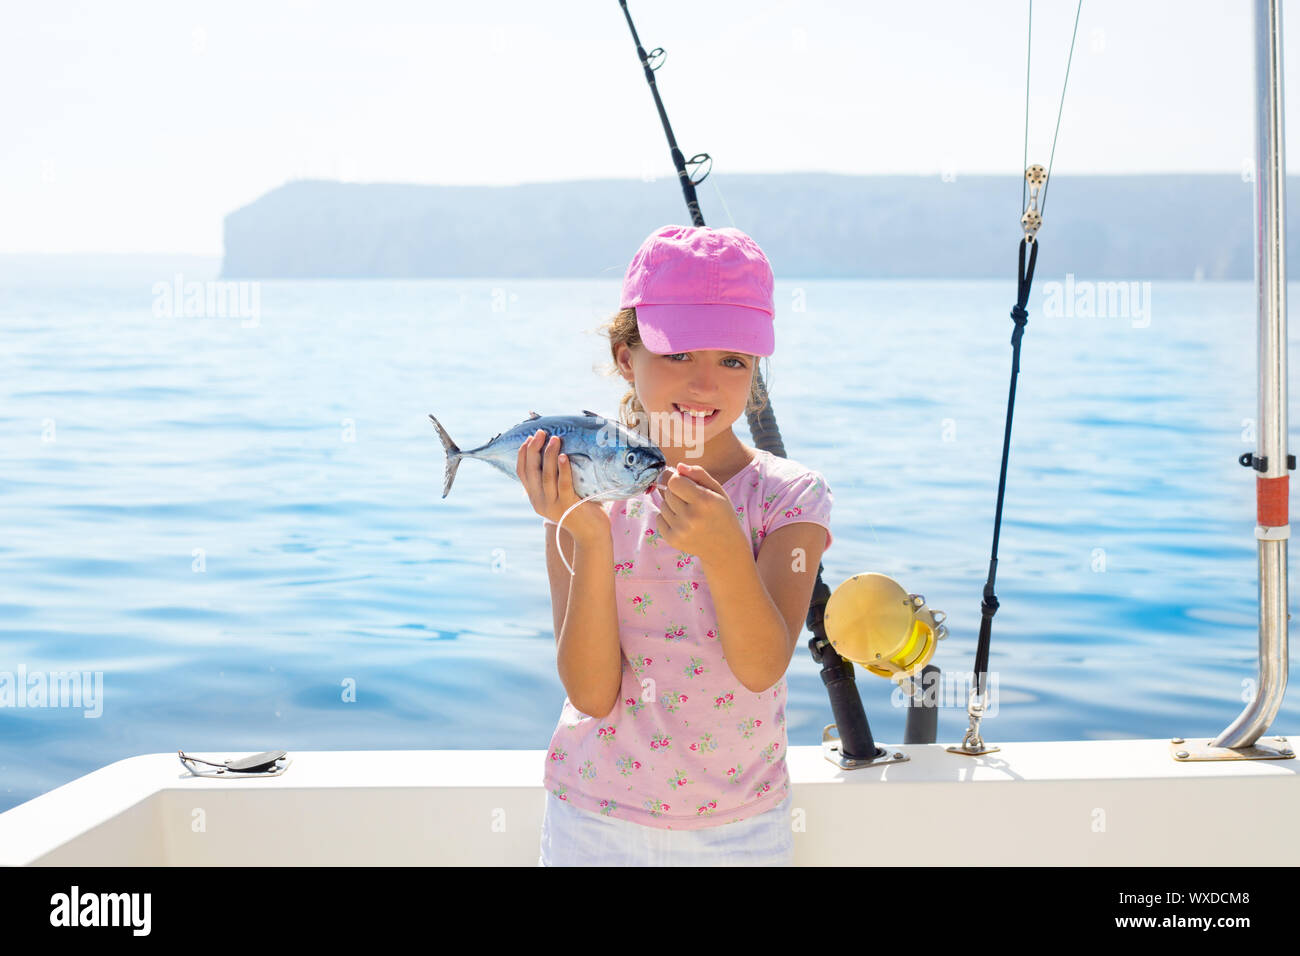 https://c8.alamy.com/comp/WXDCM8/child-little-girl-fishing-in-boat-holding-little-tunny-tuna-fish-catch-with-rod-and-trolling-reels-WXDCM8.jpg